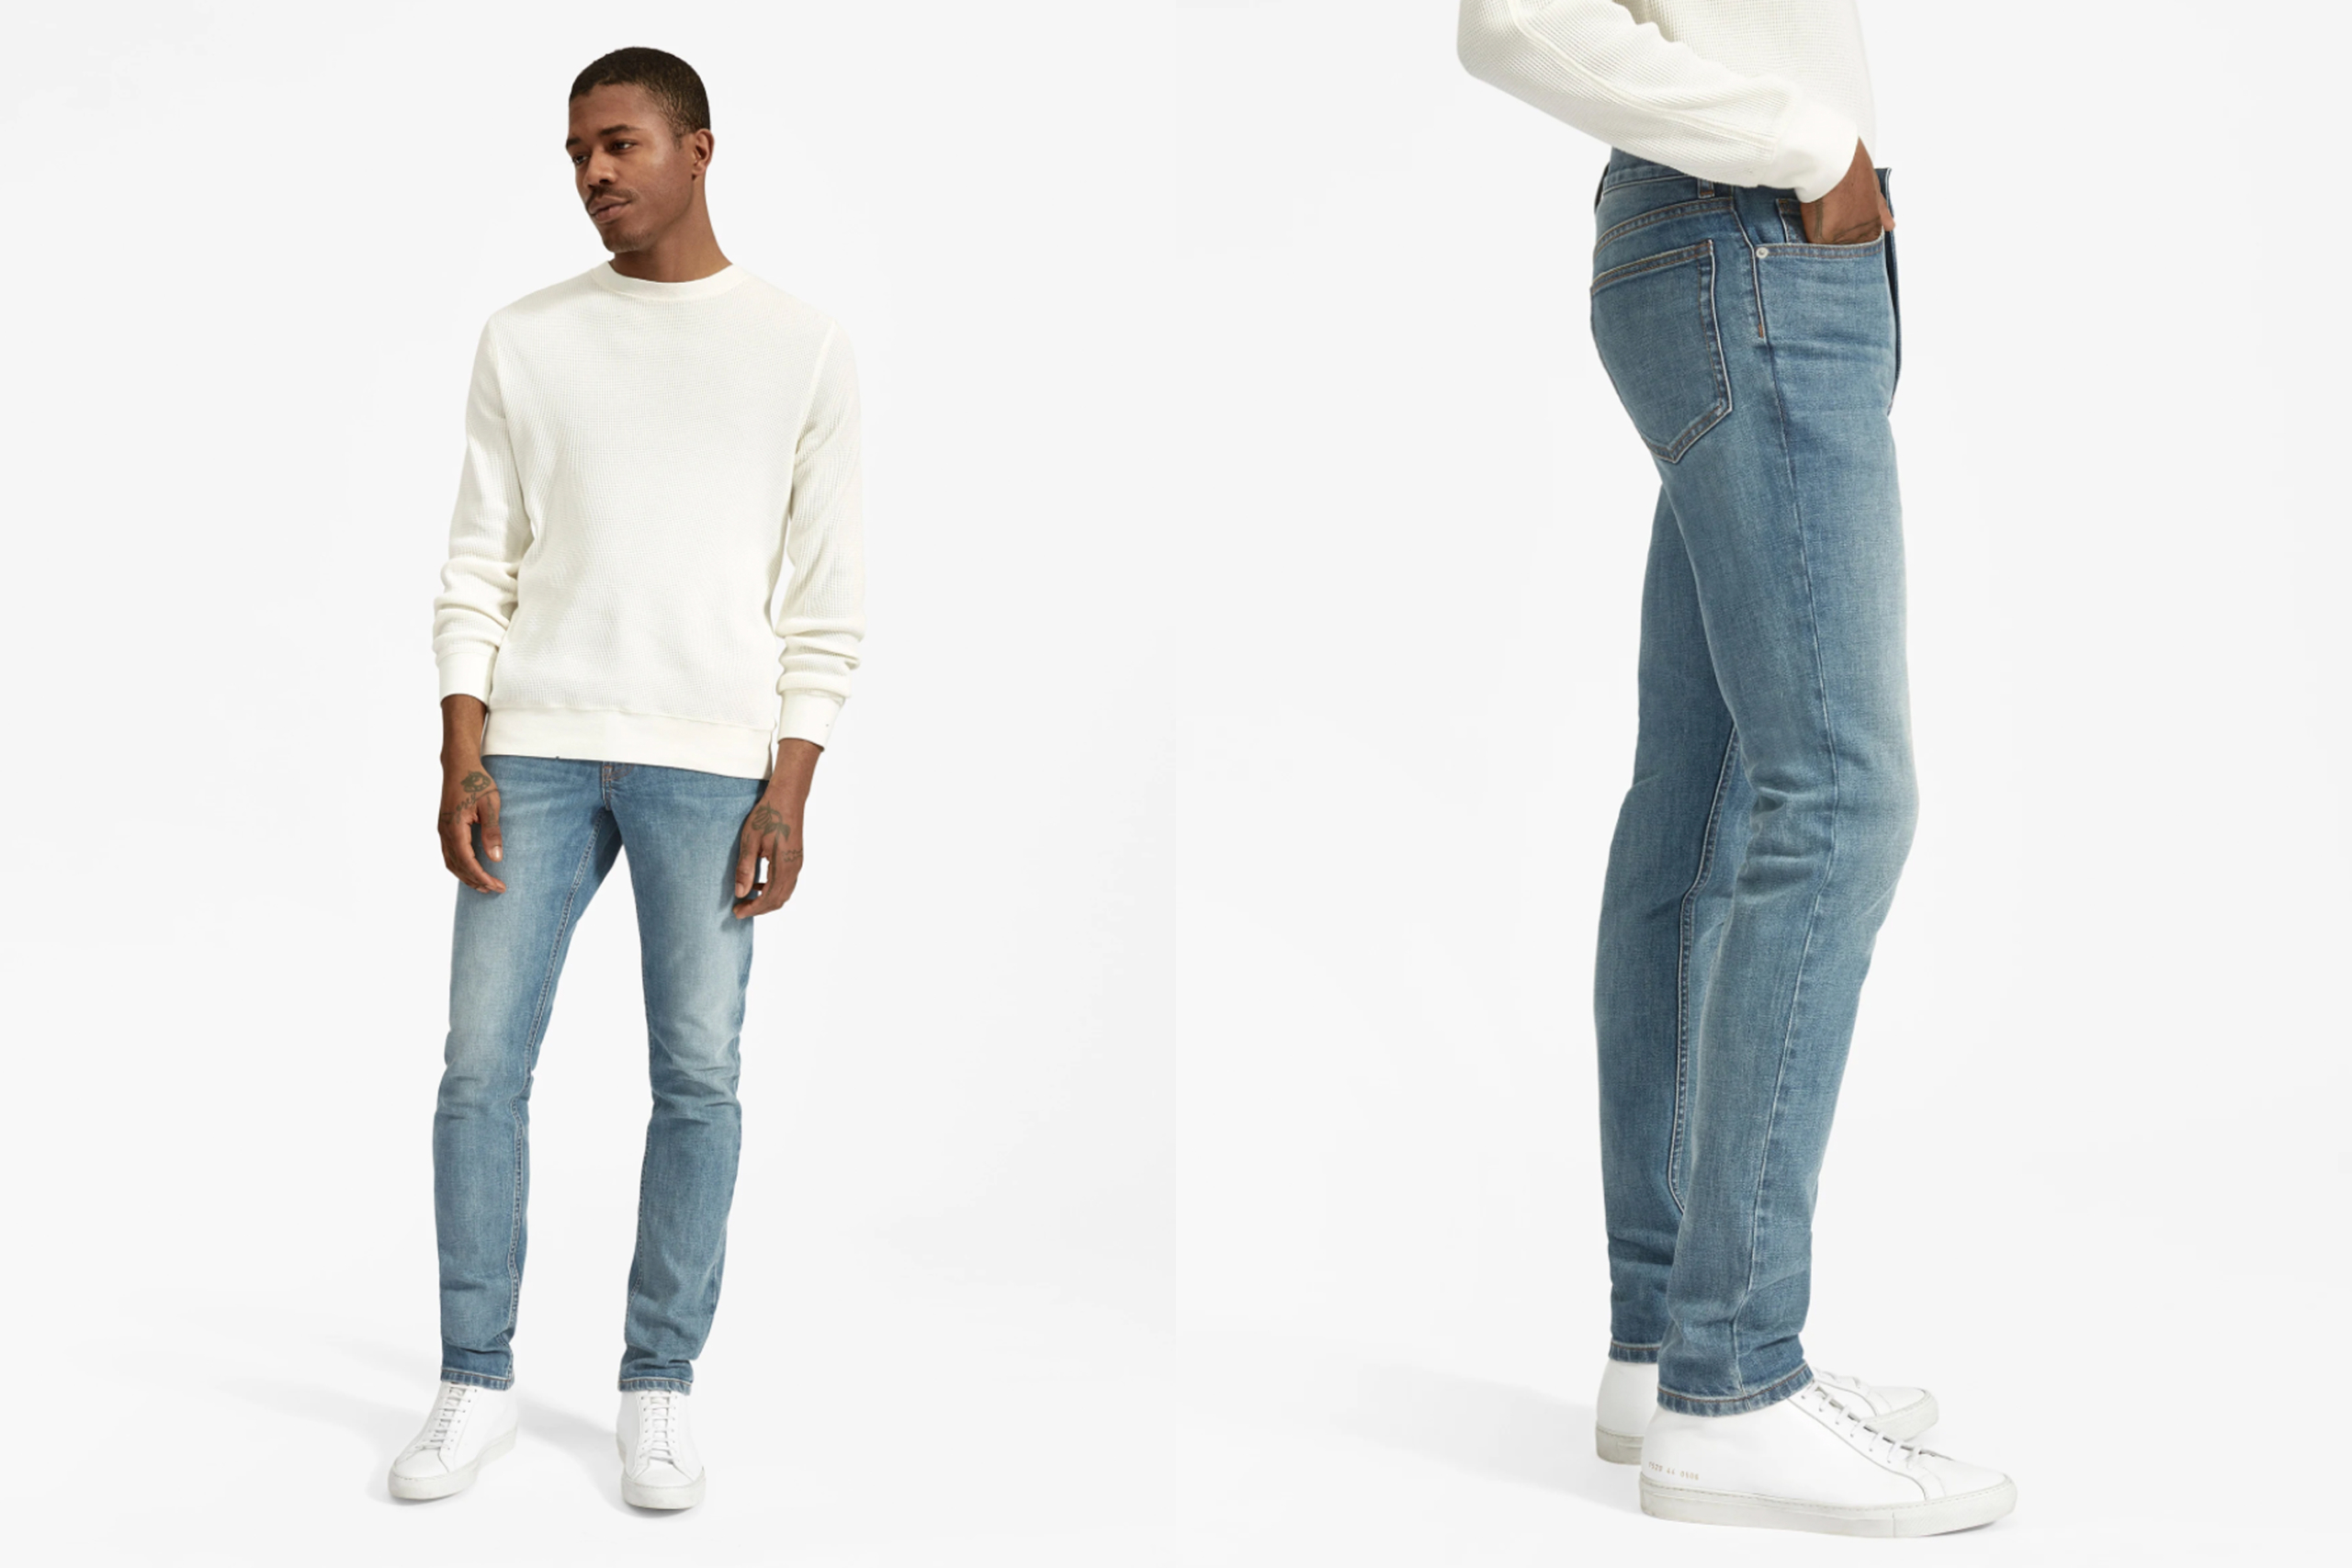 https://www.themanual.com/wp-content/uploads/sites/9/2020/06/6-everlane-scaled.jpg?fit=800%2C800&p=1